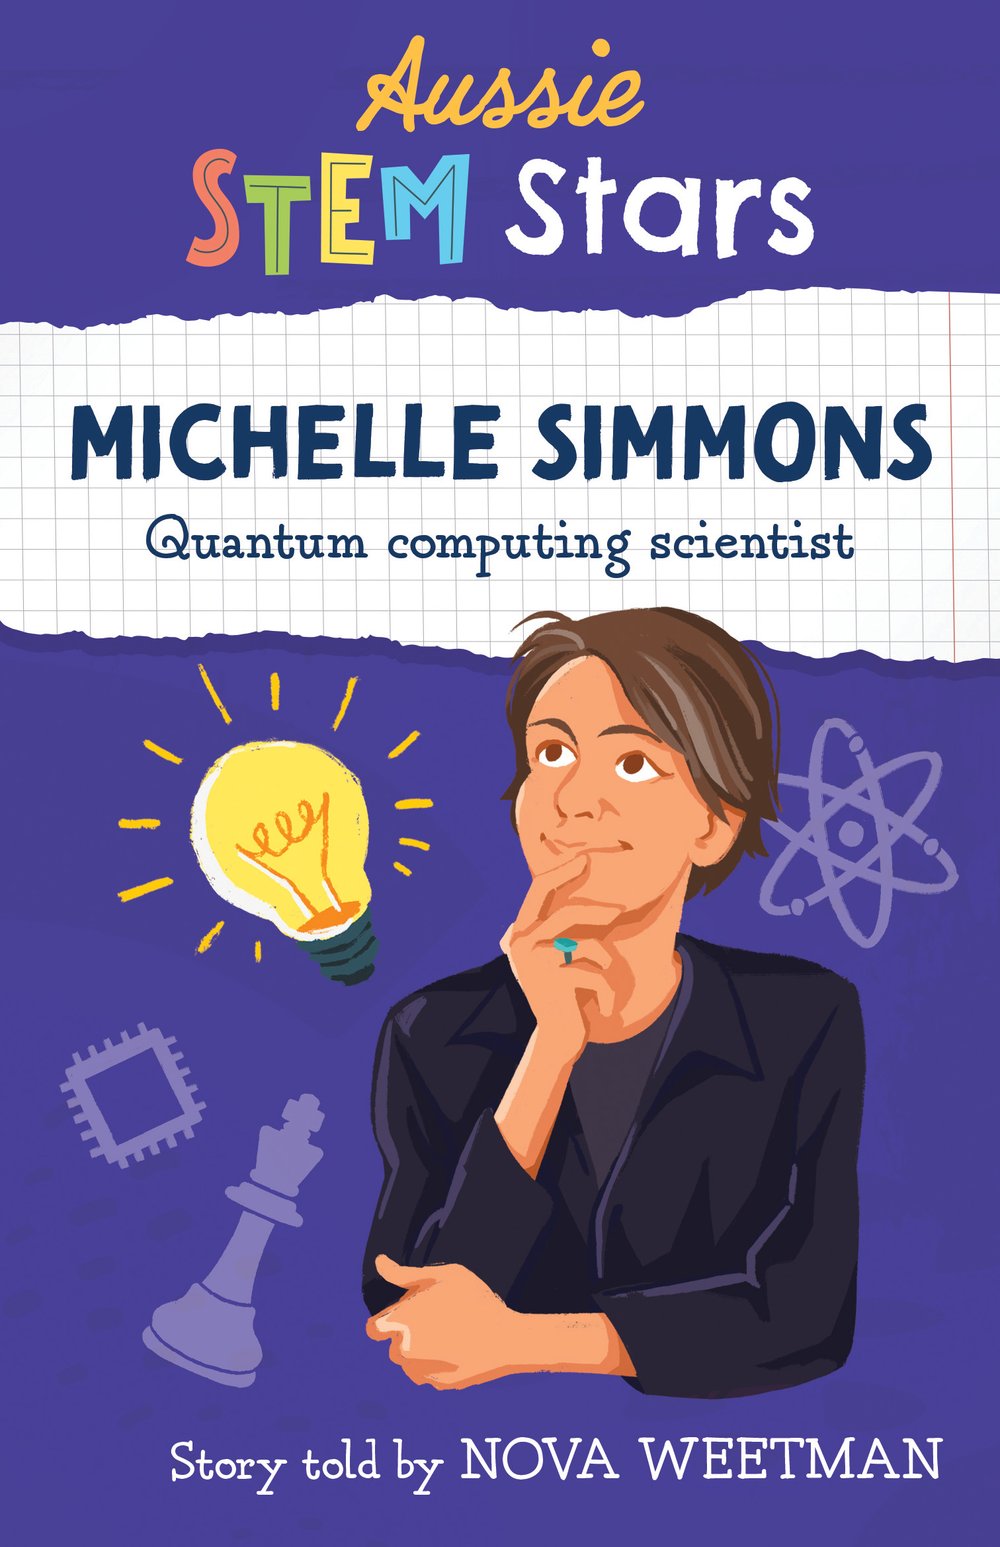 Michelle Simmons: Quantum Computing Scientist, story told by Nova Weetman